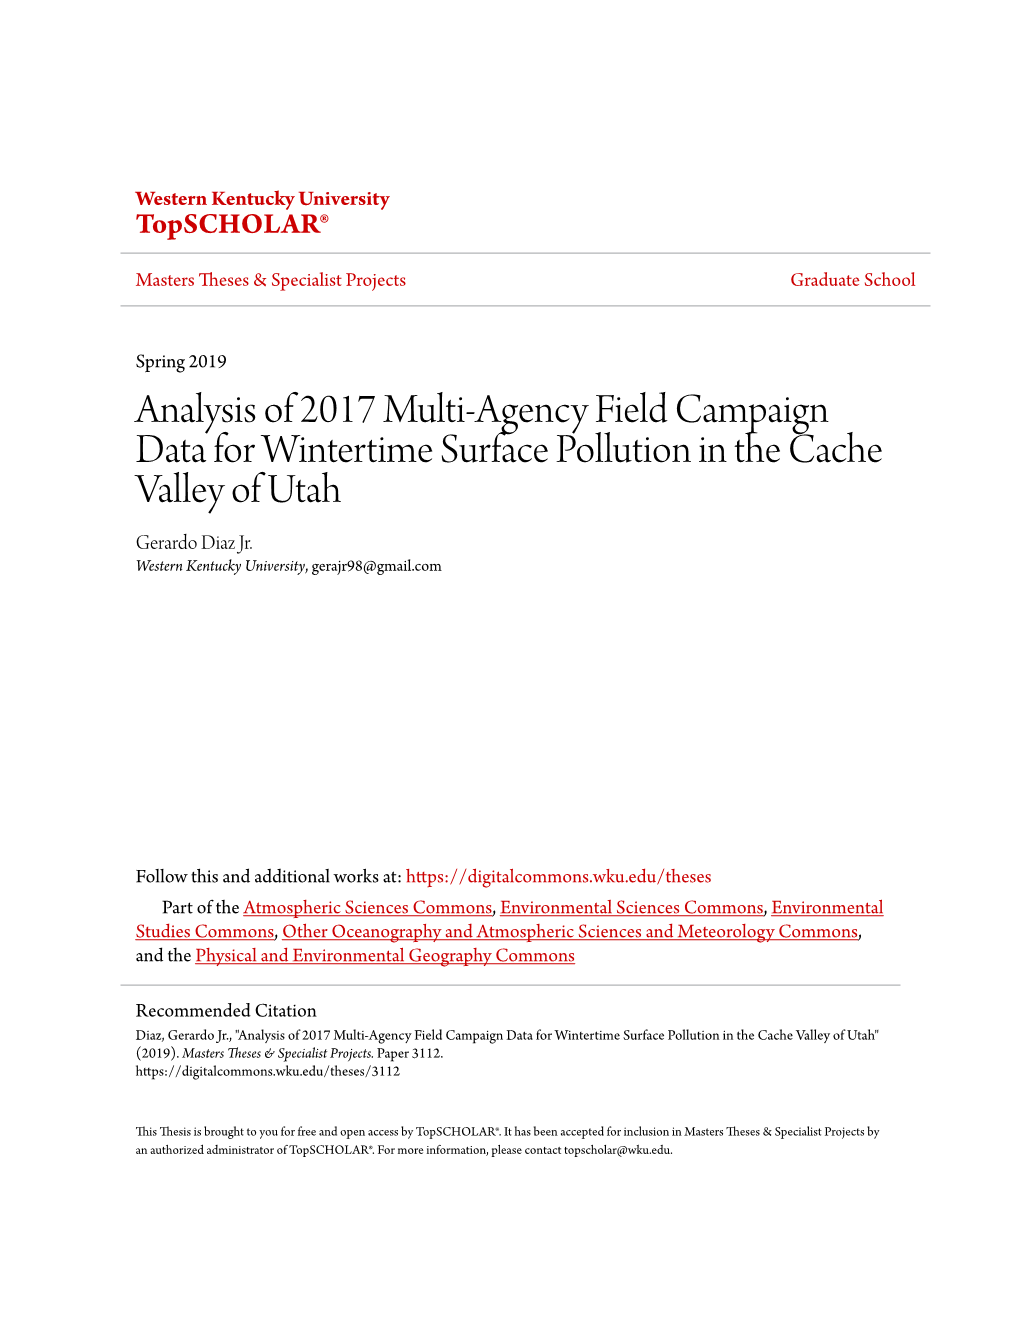 Analysis of 2017 Multi-Agency Field Campaign Data for Wintertime Surface Pollution in the Cache Valley of Utah Gerardo Diaz Jr